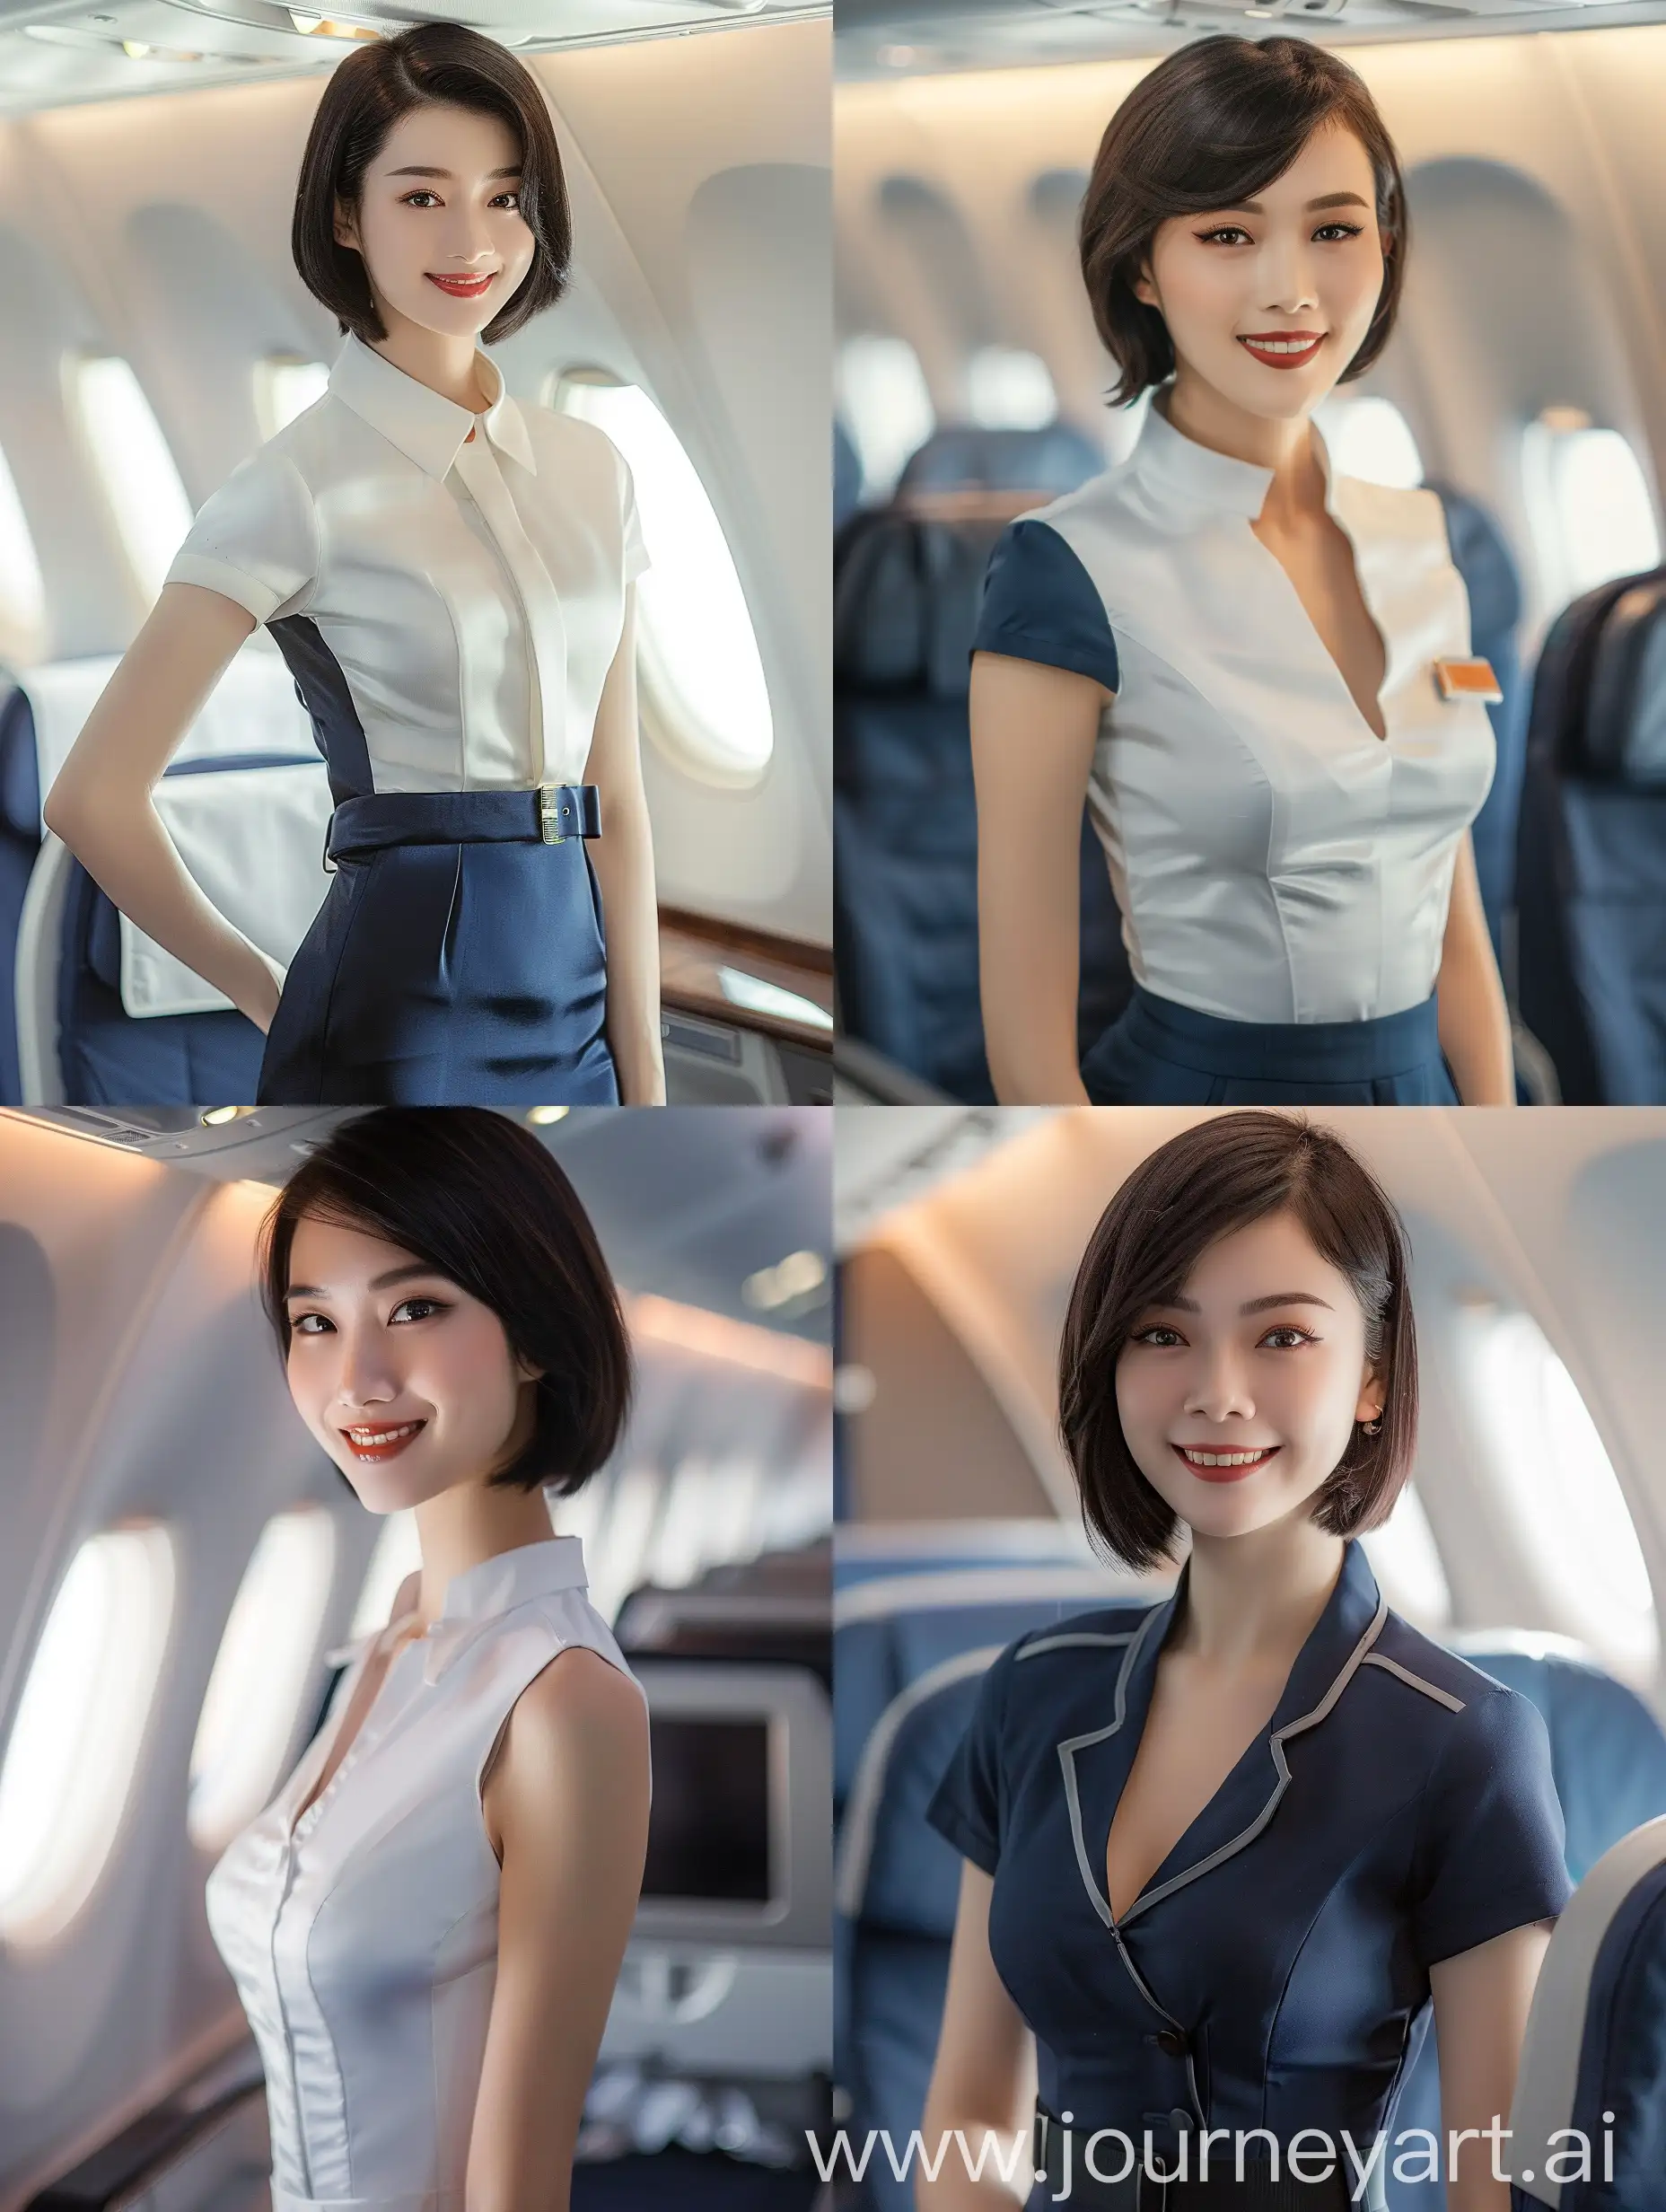 Woman, 30 Years Old, Chinese, Femininity, Slim Body, Flat Chest, Dark Short Neat Hair, Makeup, Professional Look, Modern Stewardess Uniform, Standing in Airplane Cabin, Smiling, Proud Pose, Close Up View, Photography, Realism